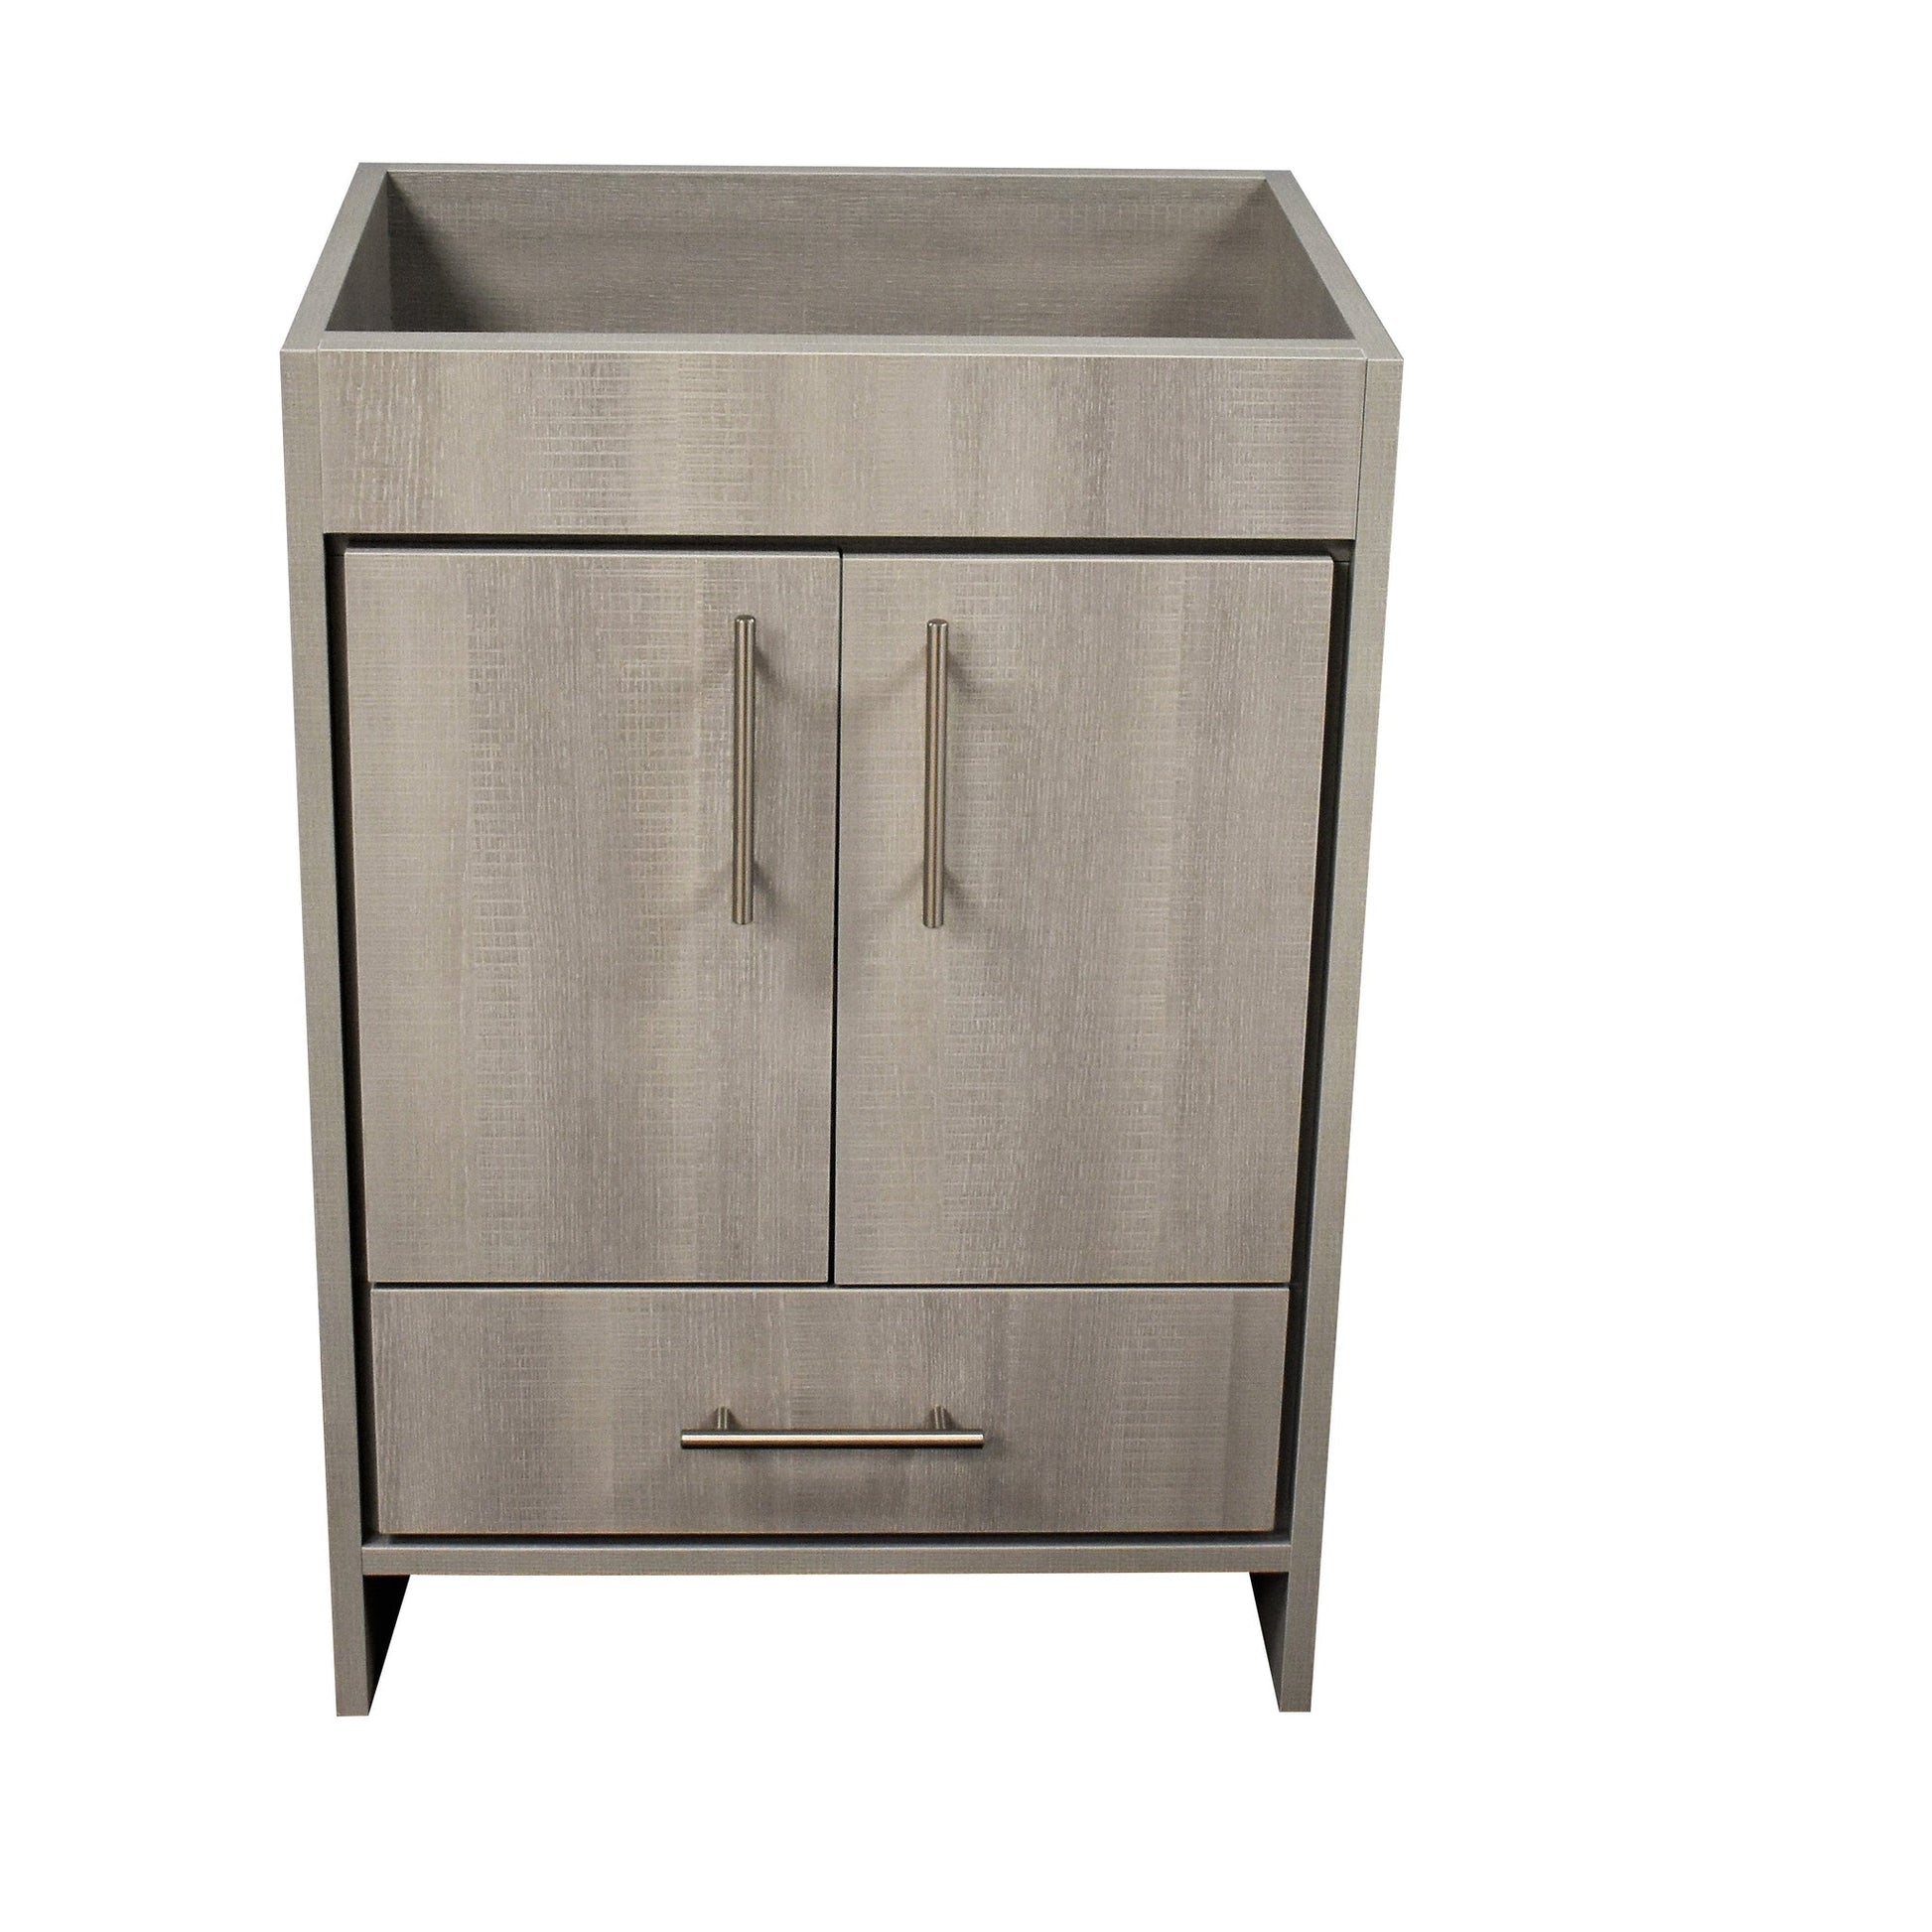 Volpa USA Pacific 24" Weathered Gray Freestanding Modern Bathroom Vanity With Brushed Nickel Round Handles Cabinet Only